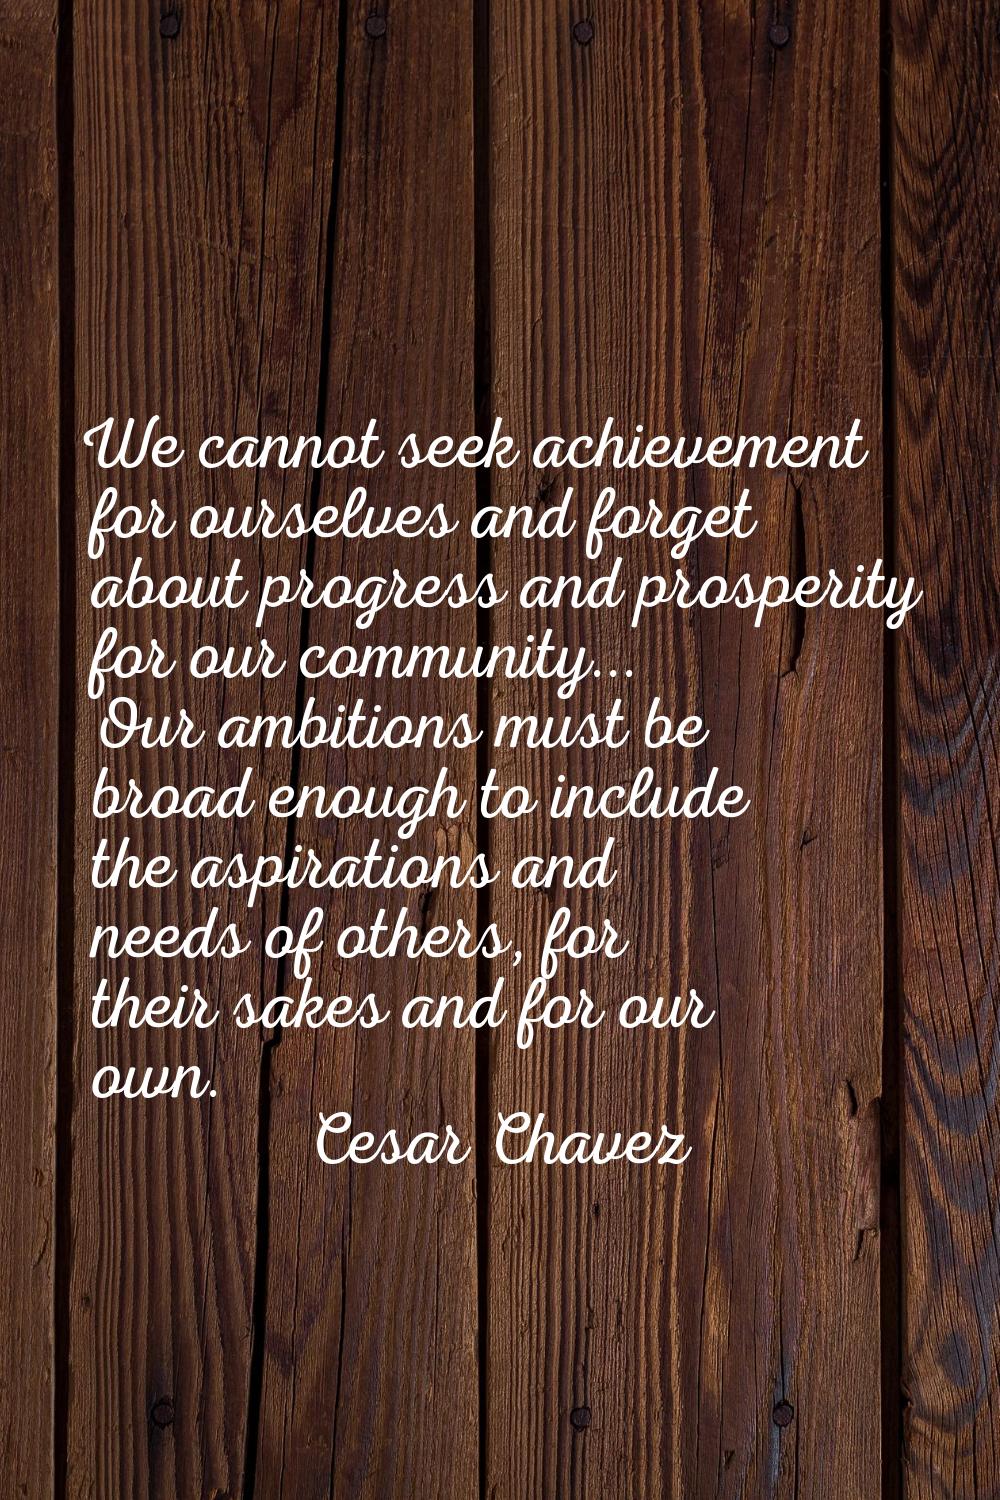 We cannot seek achievement for ourselves and forget about progress and prosperity for our community